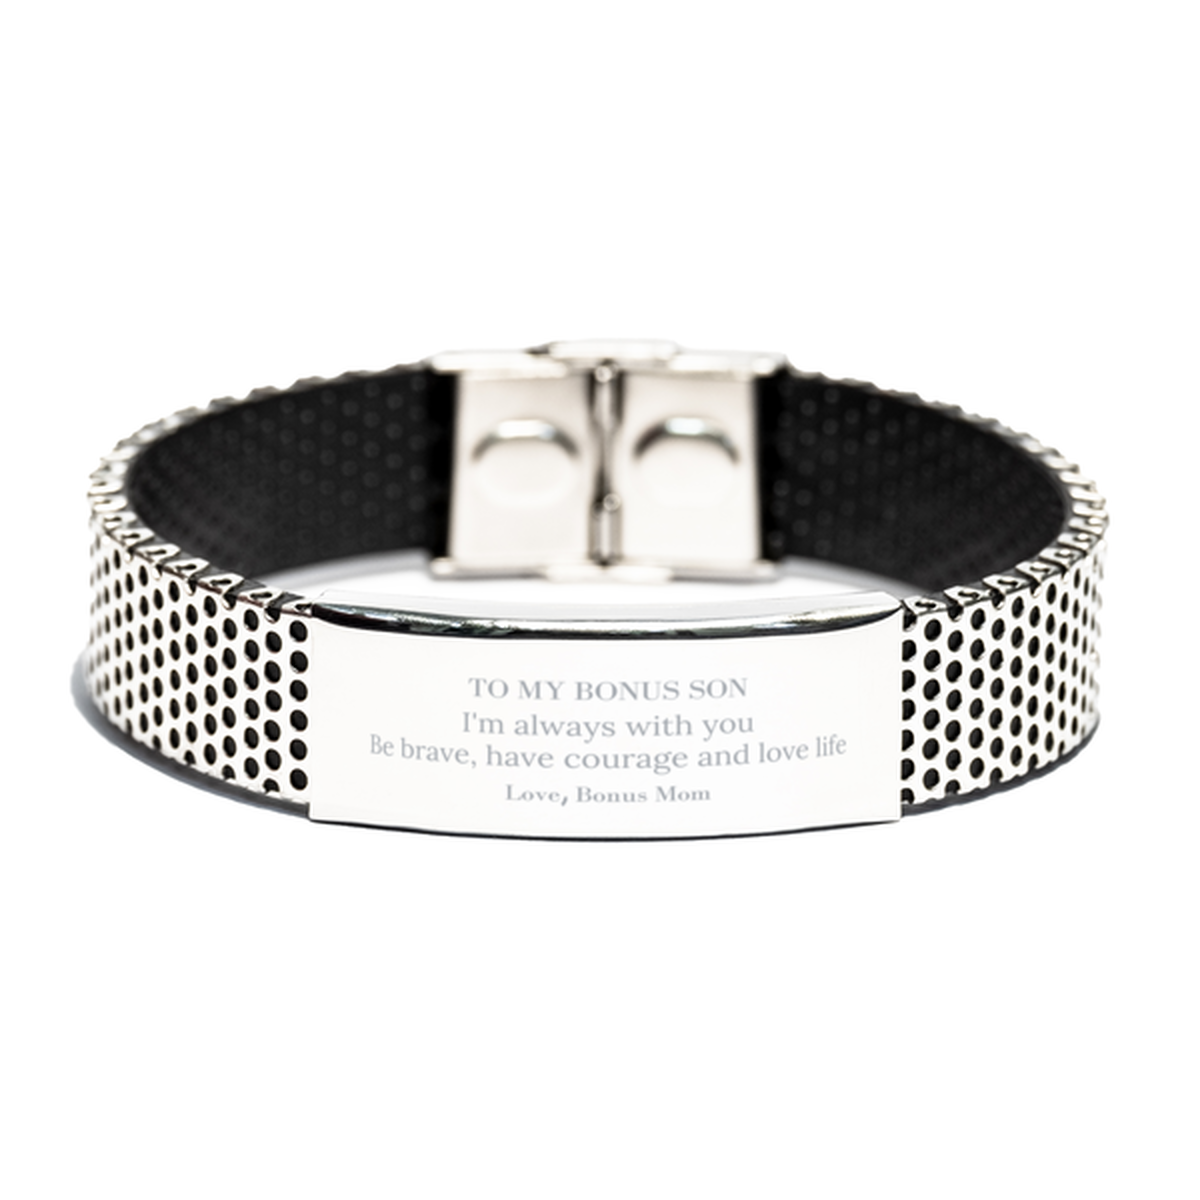 To My Bonus Son Gifts from Bonus Mom, Unique Stainless Steel Bracelet Inspirational Christmas Birthday Graduation Gifts for Bonus Son I'm always with you. Be brave, have courage and love life. Love, Bonus Mom